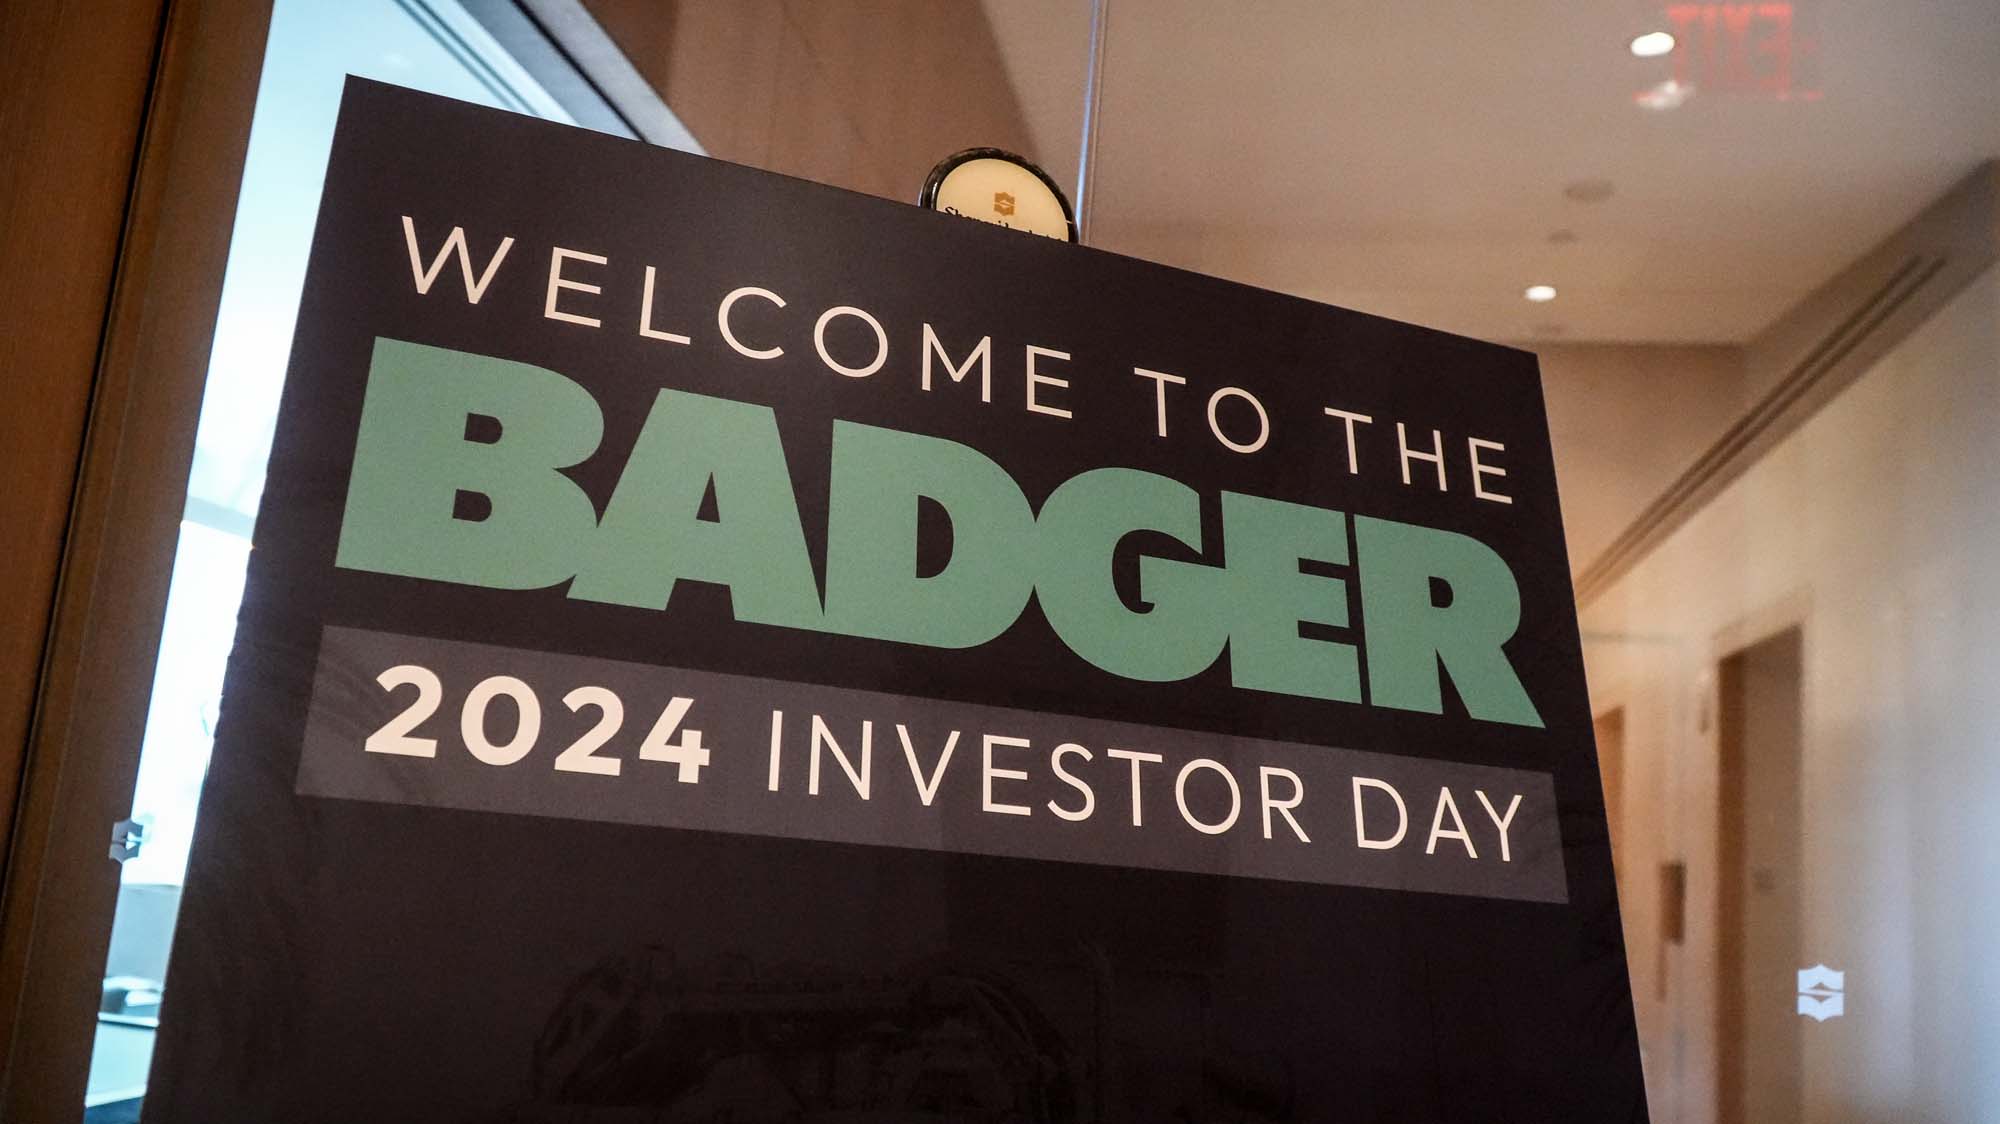 Sign of Badger's Investor Day meeting as part of an investor day event production from Valere